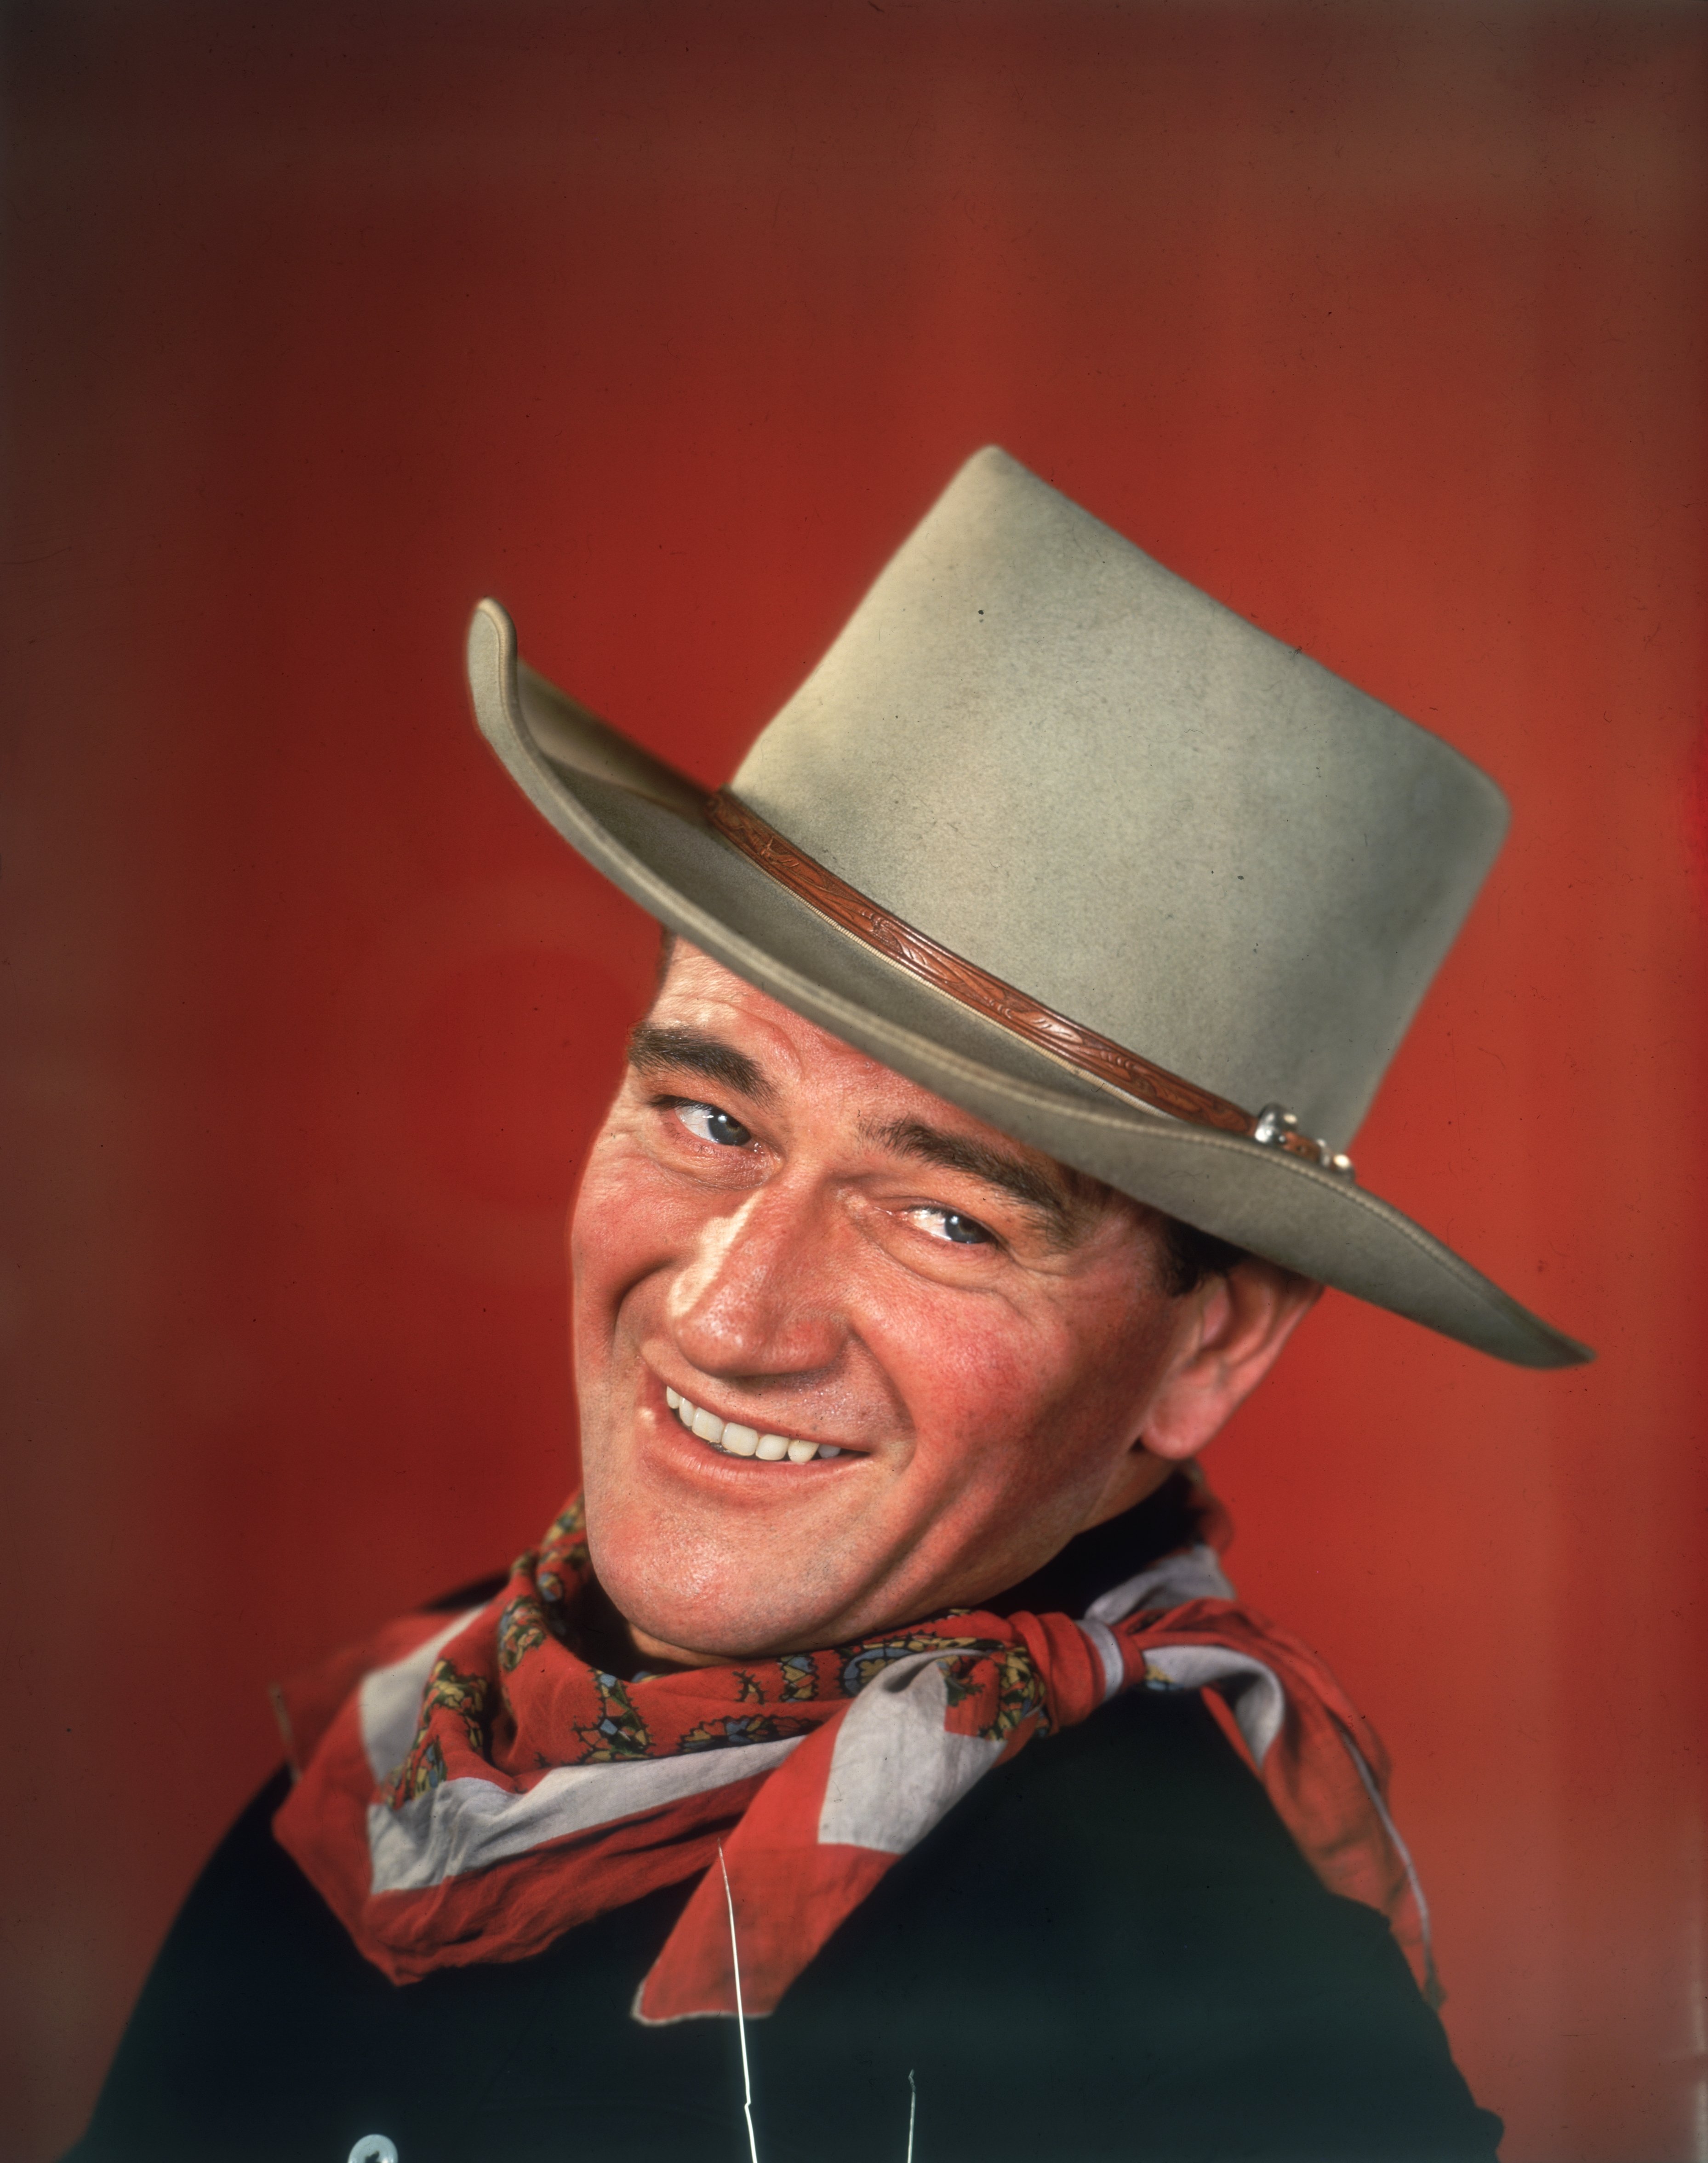 circa 1955: Studio headshot portrait of American actor John Wayne smiling in front of a red background | Photo: GettyImages